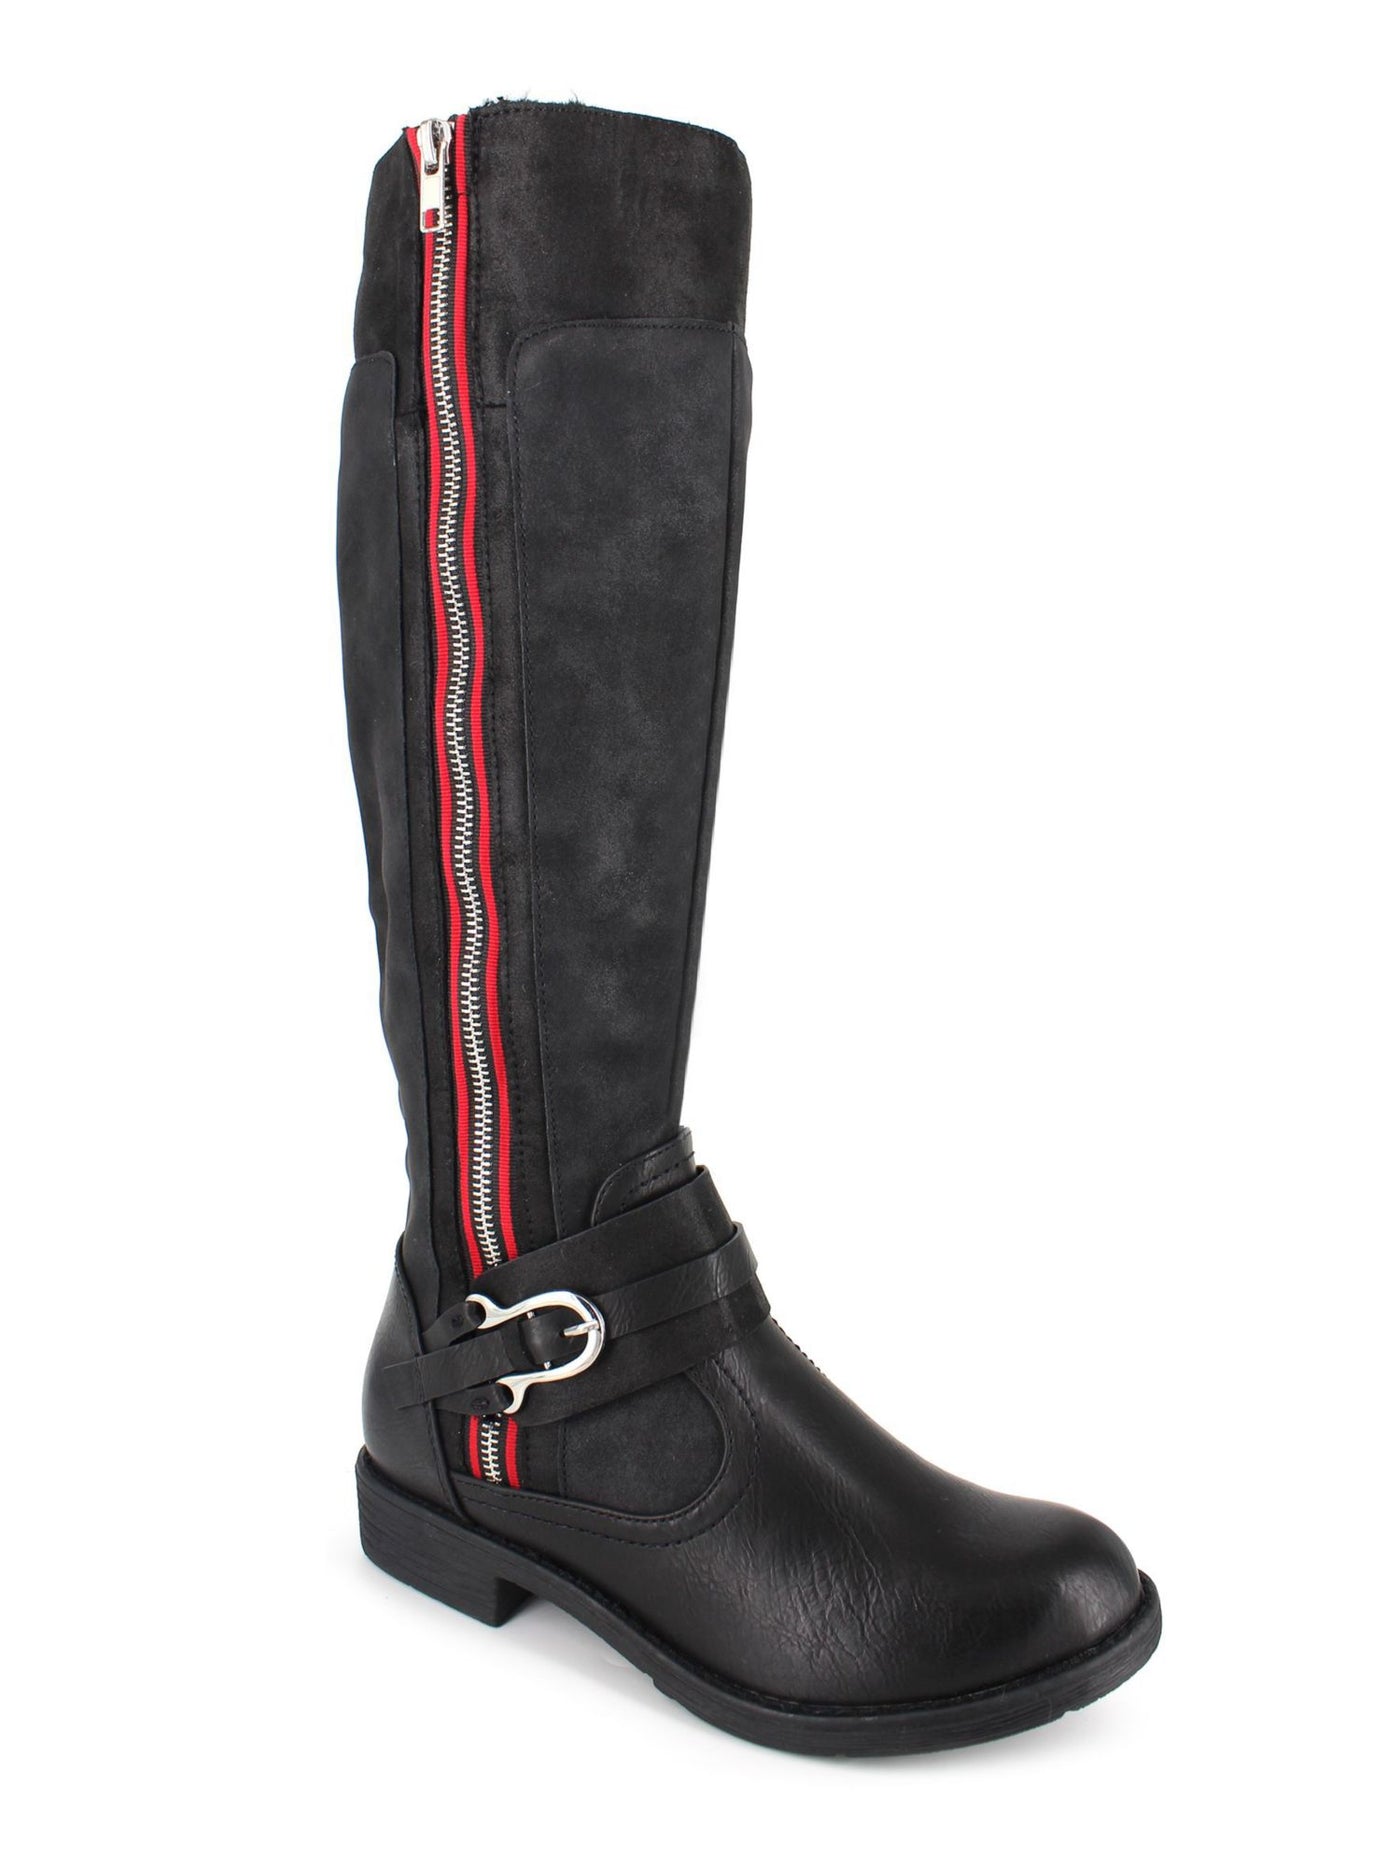 ZIGI SOHO Womens Black Faux Firm Trim Accent Stripes Buckle Accent Zipper Accent Stephany Round Toe Block Heel Zip-Up Riding Boot 8.5 M